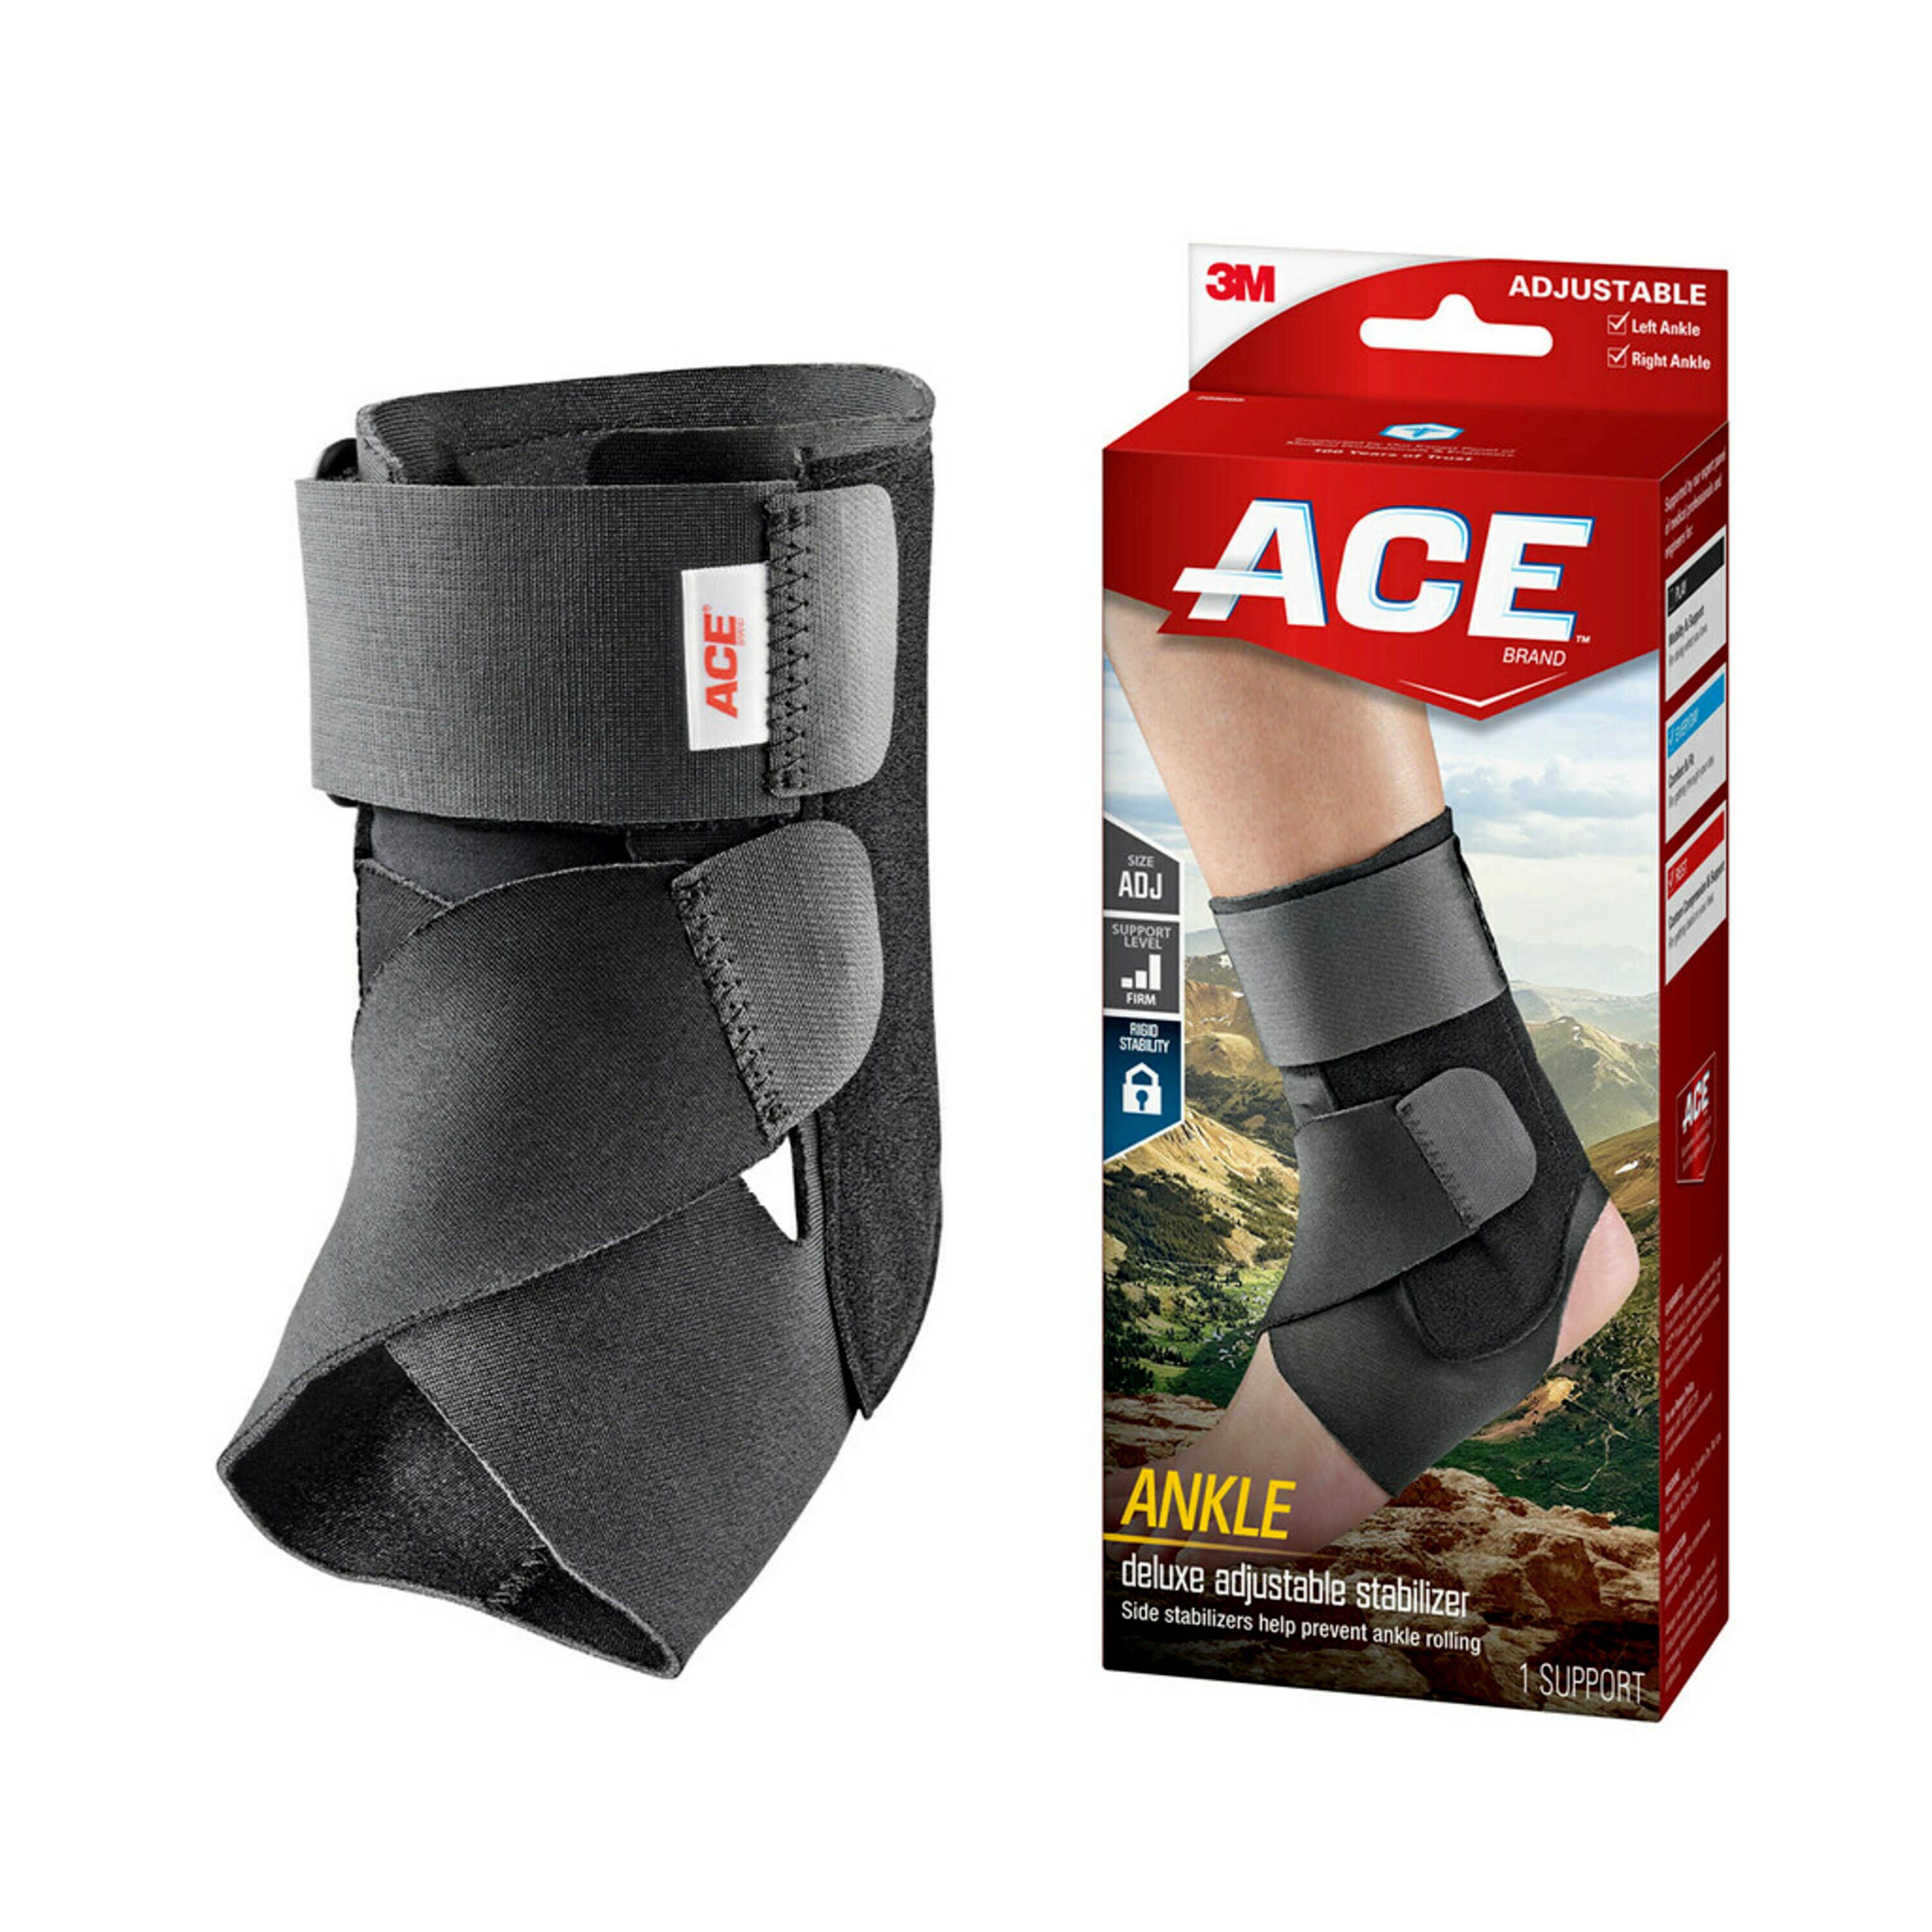 ACE Brand Deluxe Adjustable Ankle Stabilizer, Black – One Size Fits Most - image 2 of 6